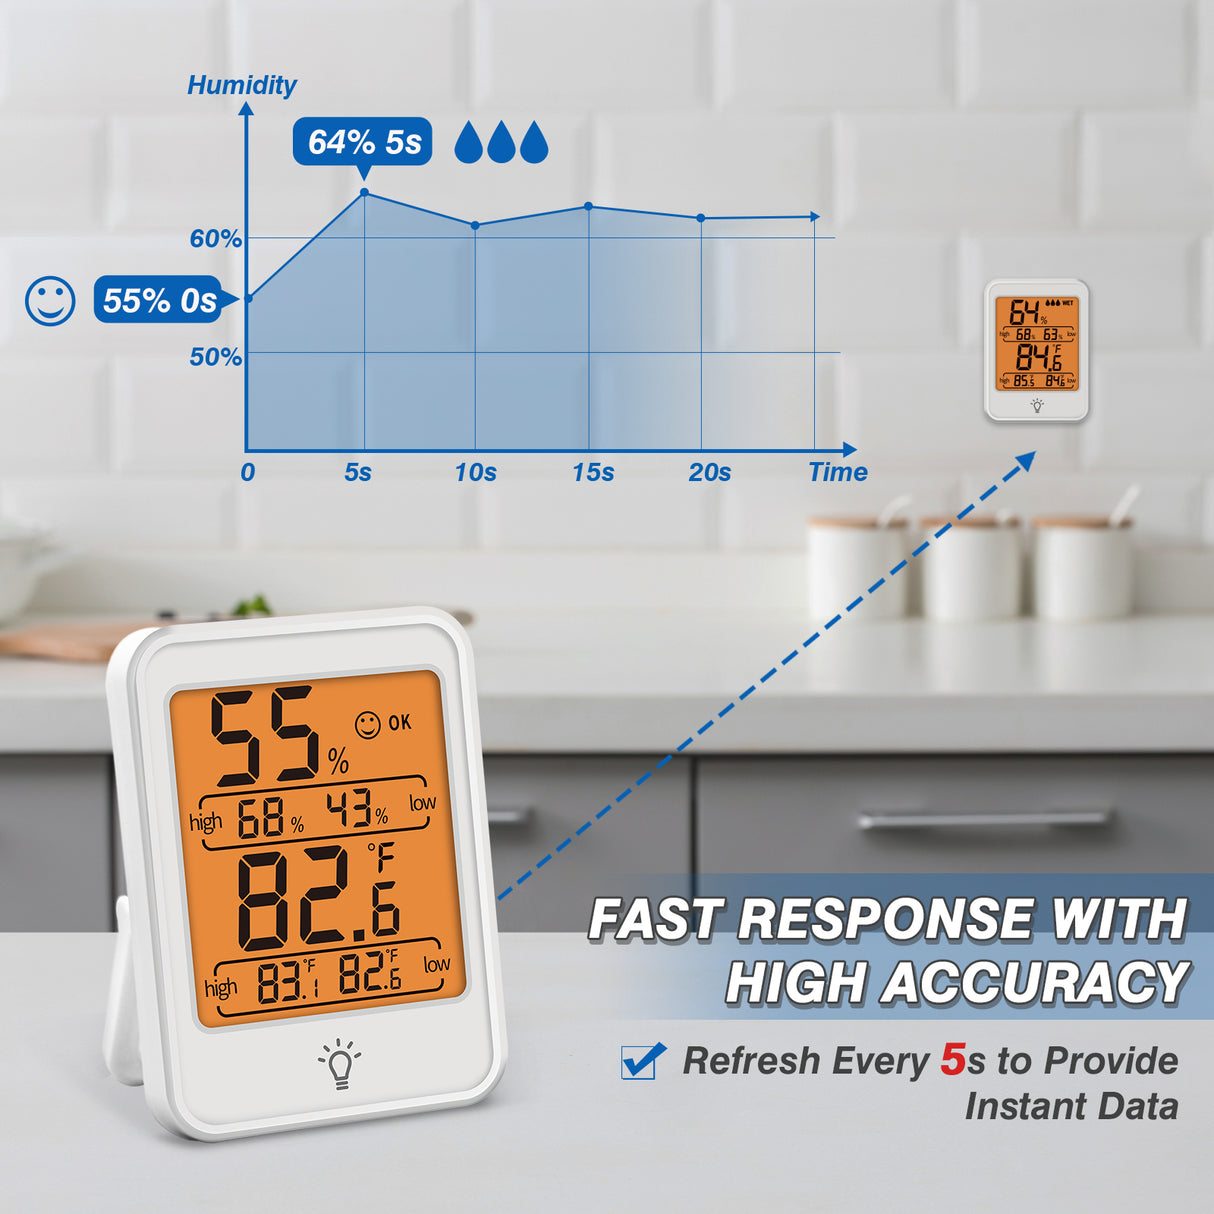 EAGLE PEAK Digital Hygrometer, 2 Pack Indoor Thermometer Humidity Gauge with Temperature Humidity Monitor for Nursery Room, Living Room, Office, Basement, Greenhouse, White